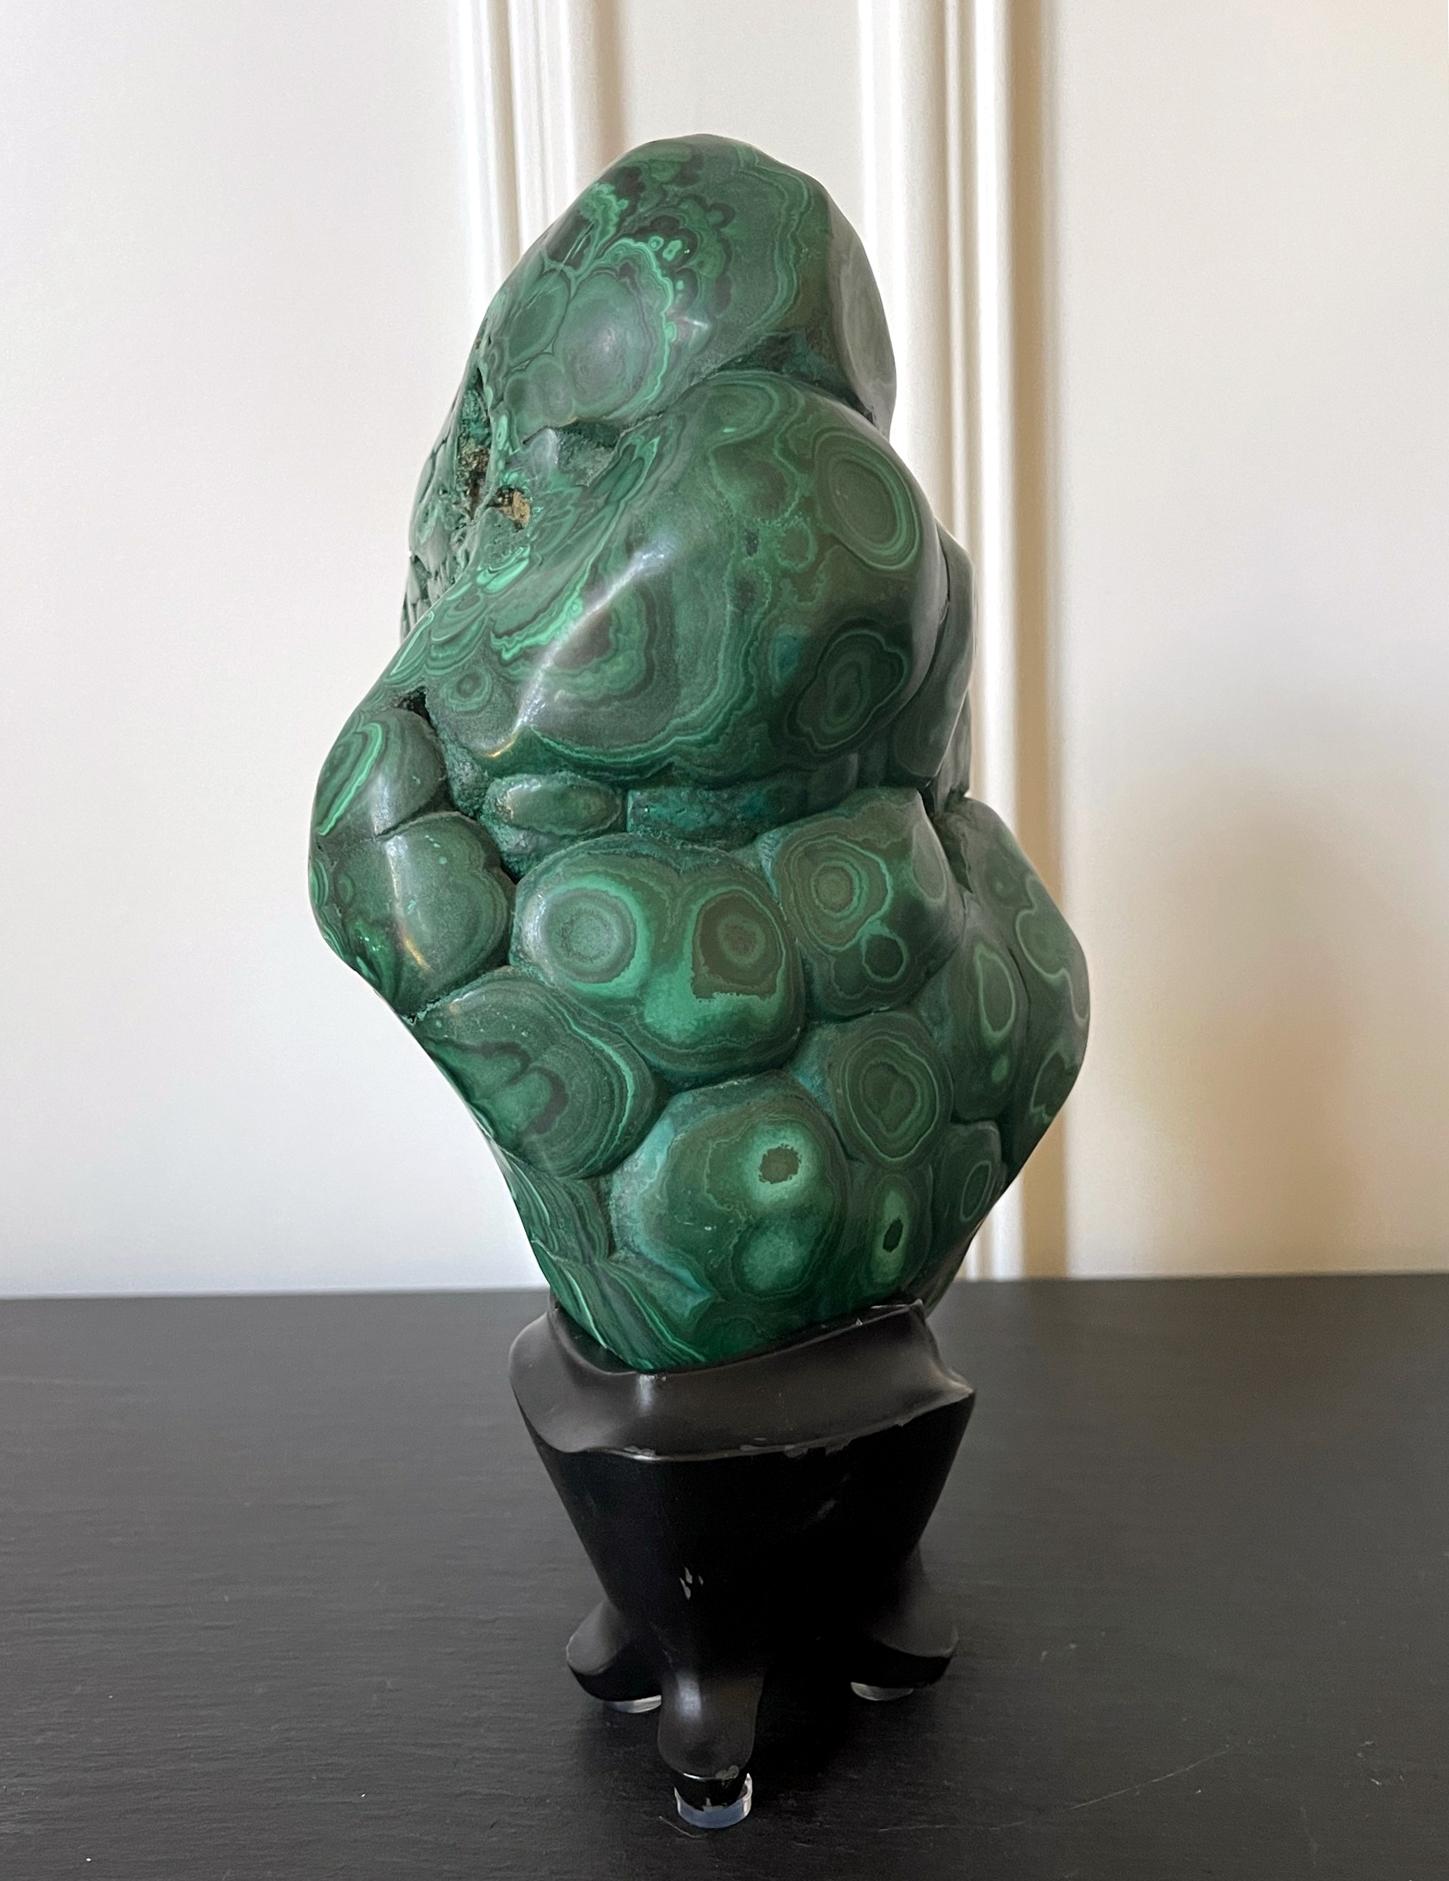 20th Century Malachite Rock on Display Stand as a Chinese Scholar Stone